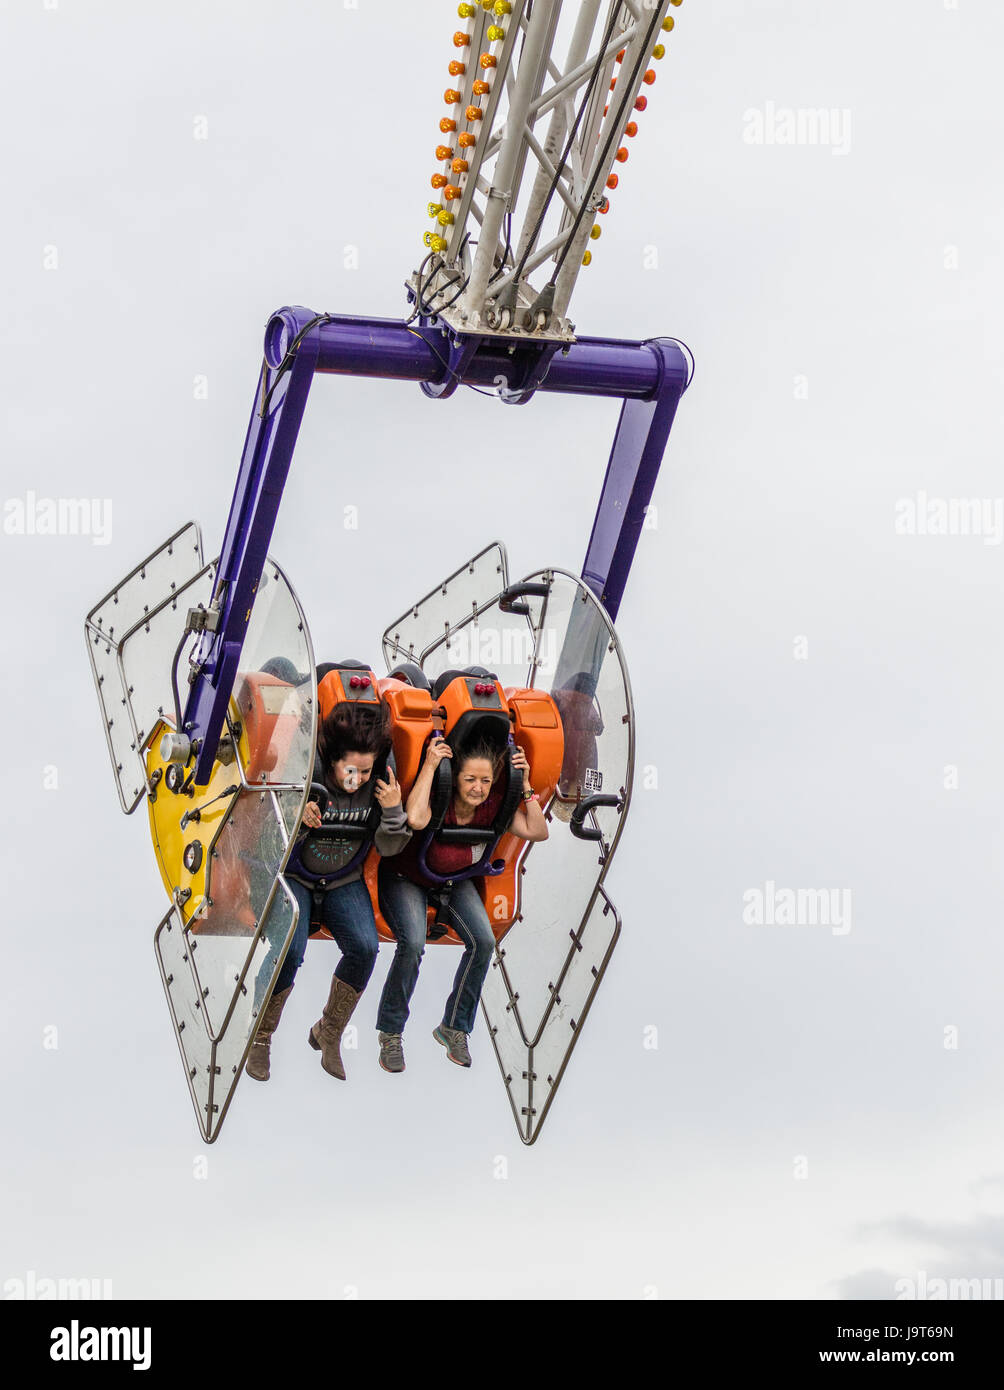 Popular ride with children at the county fair. Stock Photo